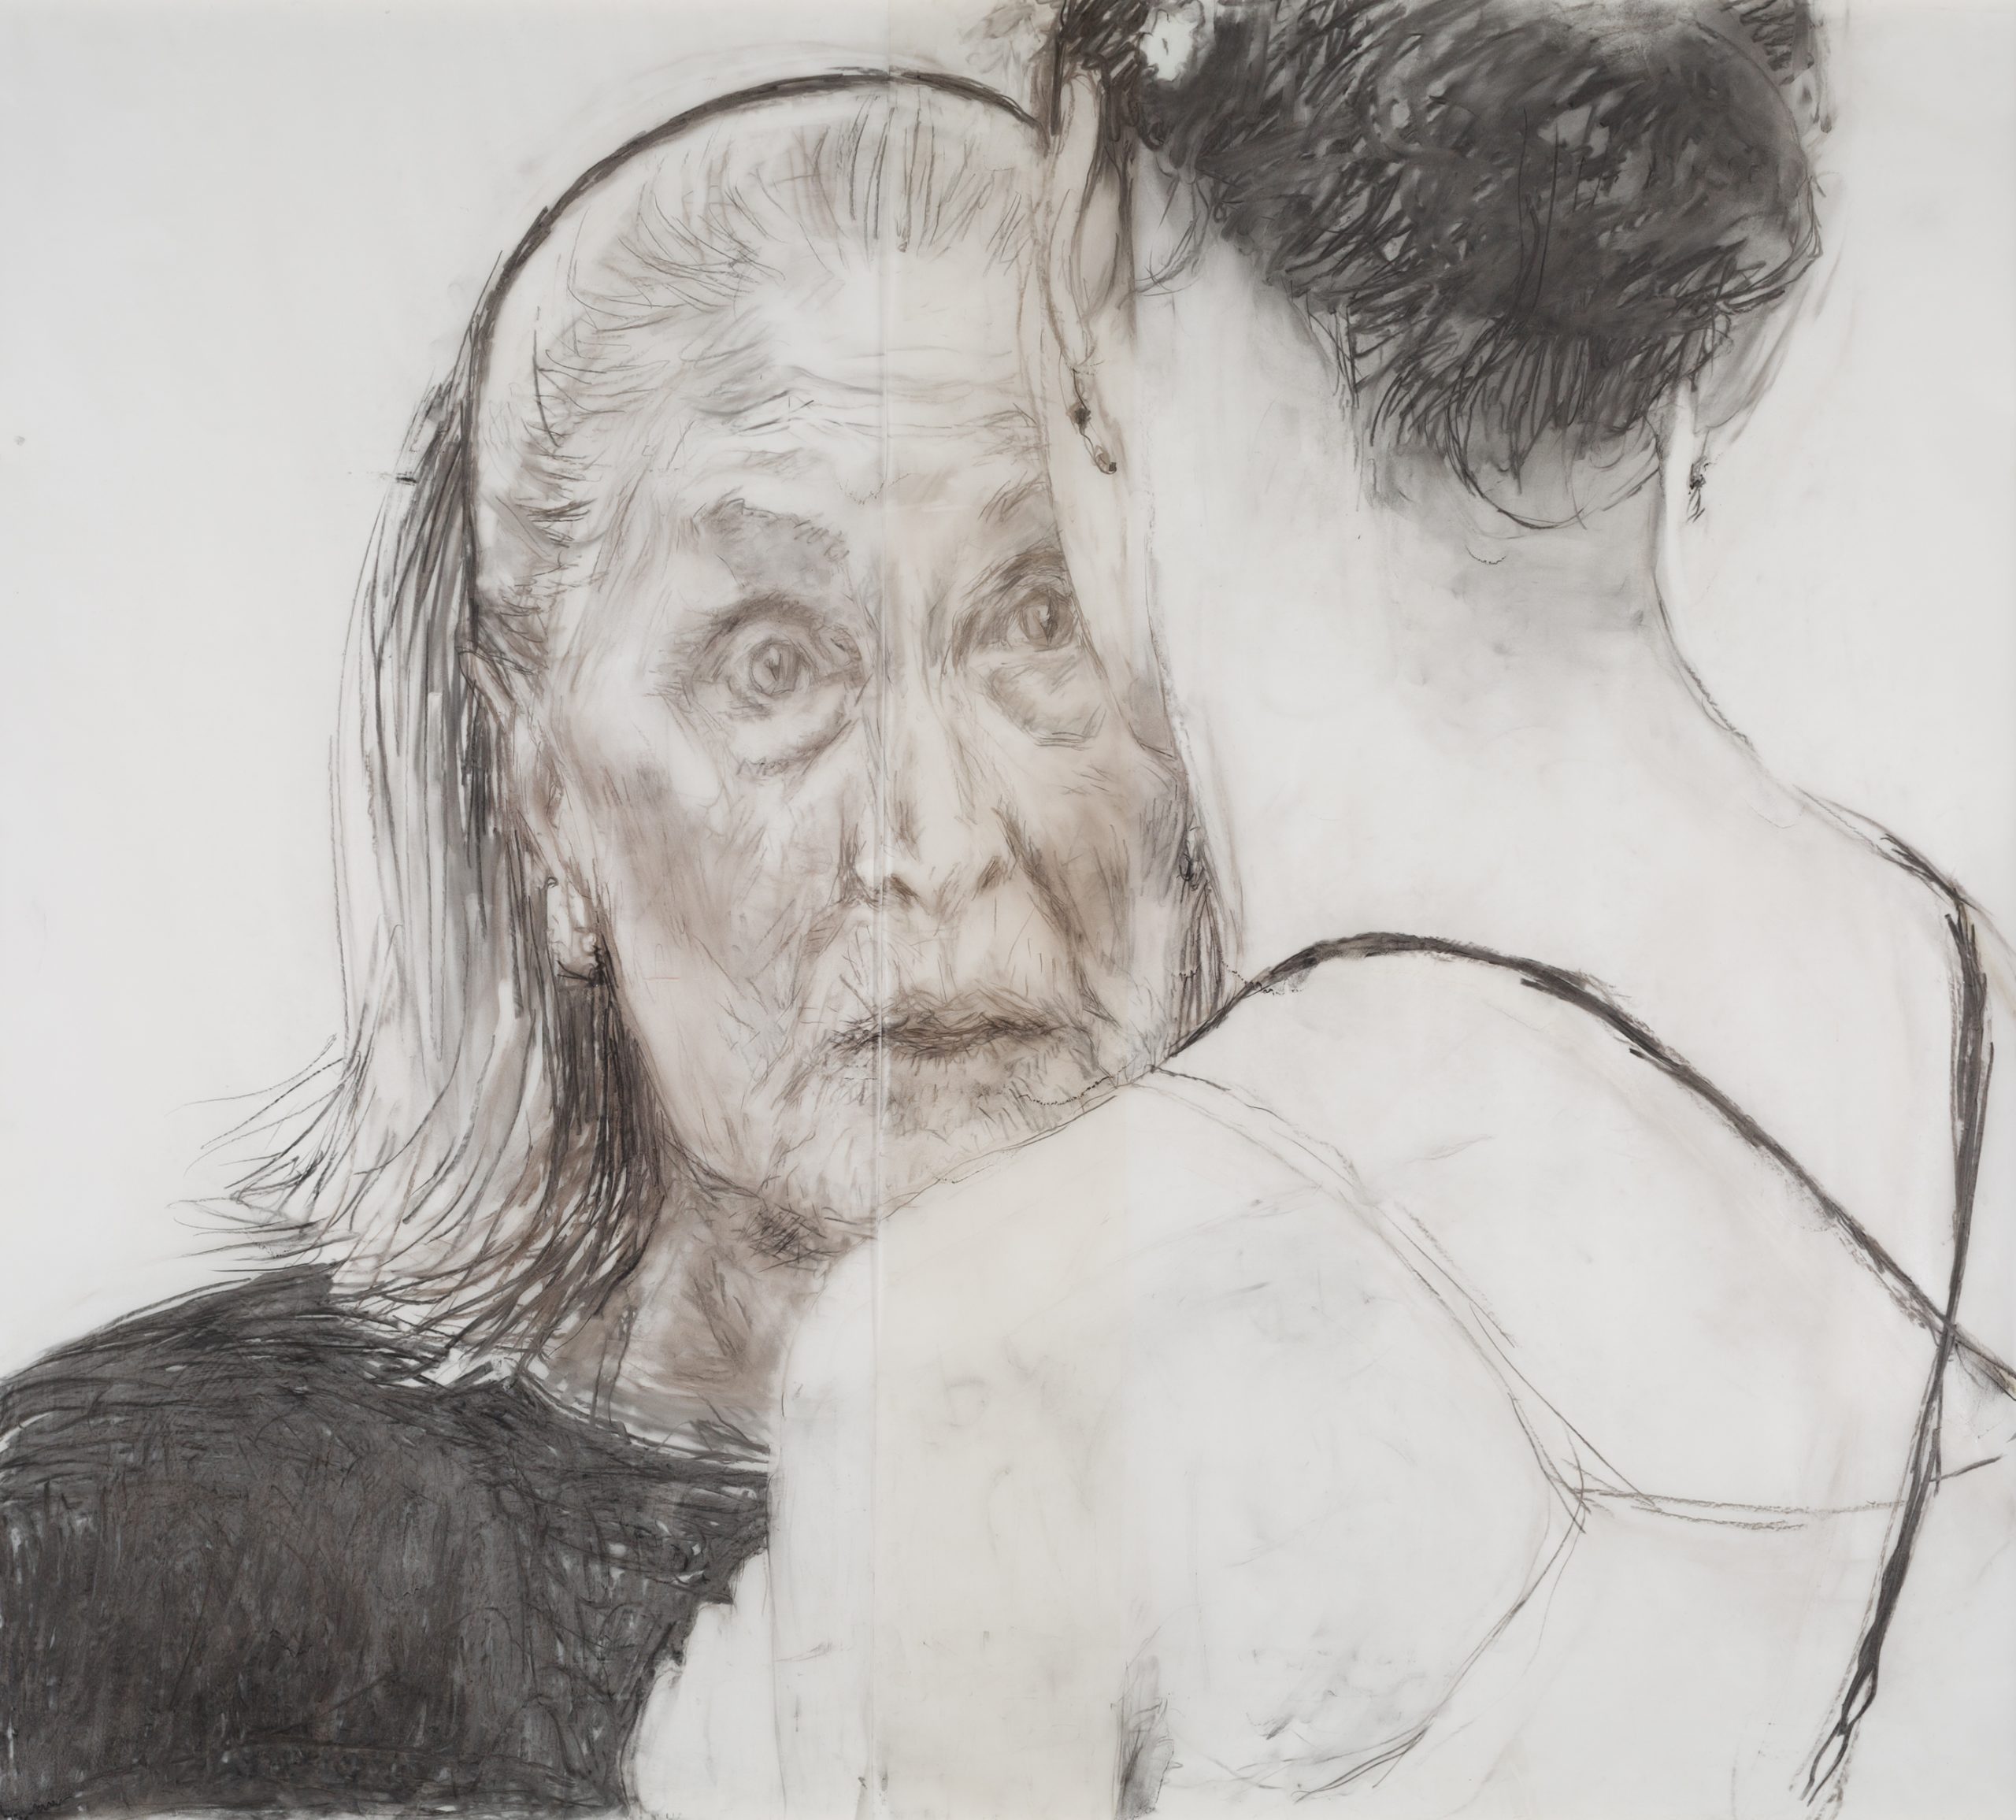 Pencil sketch of a dancer who is turned away from us and looking into the eyes of an older woman, slightly obscuring her. The older woman's gaze is intense and her hair is pushed back with a hairband.